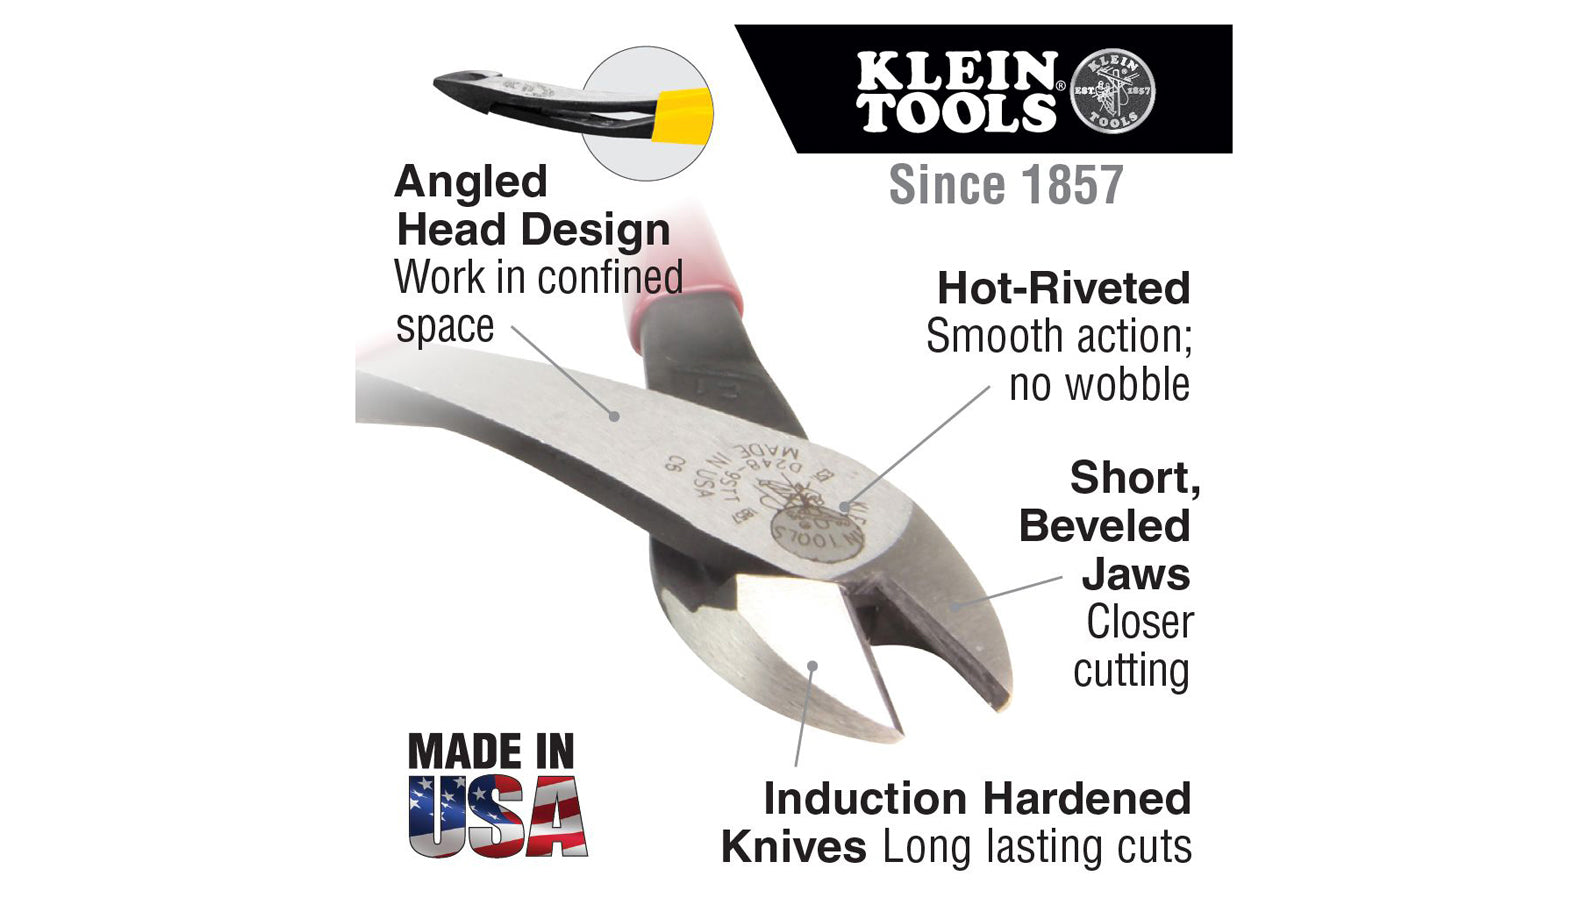 These Klein Tools 8" Diagonal Cutting Pliers with Angled Head D248-8 have a high-leverage for greater cutting power. The angled head design makes work easier in confined spaces. The hot-riveted joint ensures smooth action with no handle wobble. For non ferrous wire & soft metal cutting. 8" overall length. 092644720703